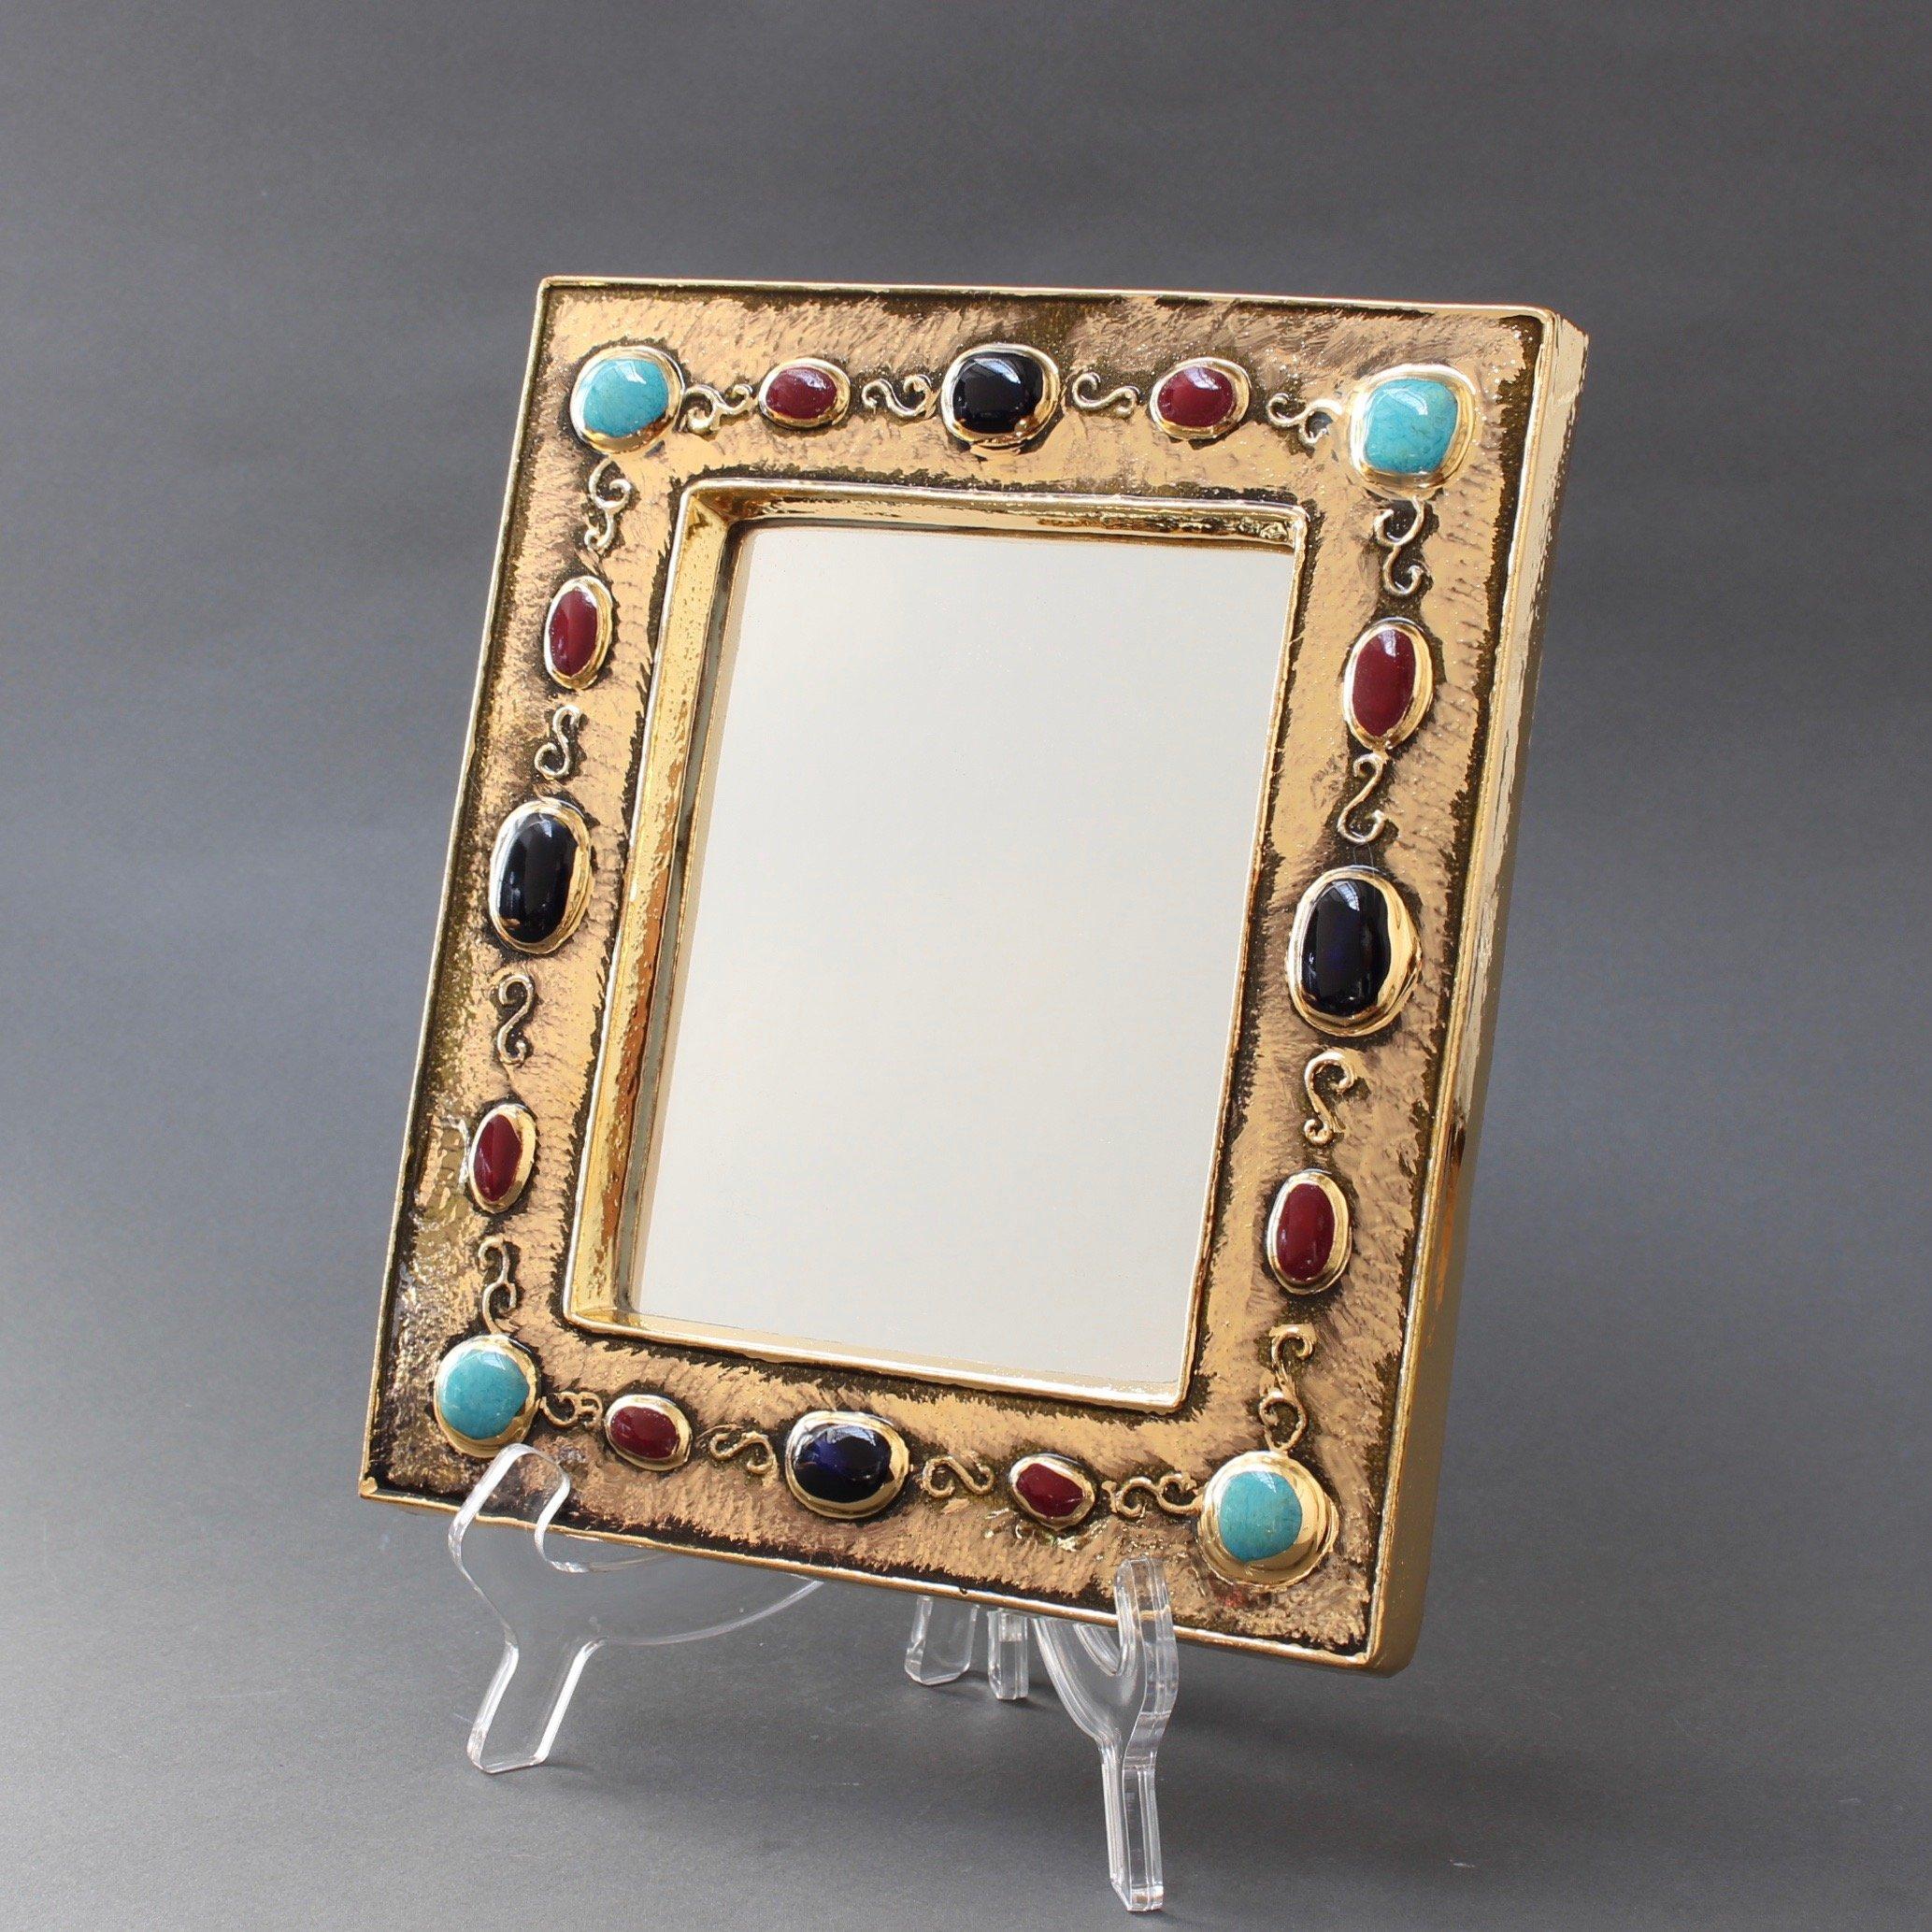 Inspired by Byzantine iconography, a rectangular, gilded glazed ceramic wall mirror by François Lembo (circa 1960s-1970s). With enamelled ceramic cabochons in alternating colours of black, ruby red and turquoise, it is an unusually elegant piece of